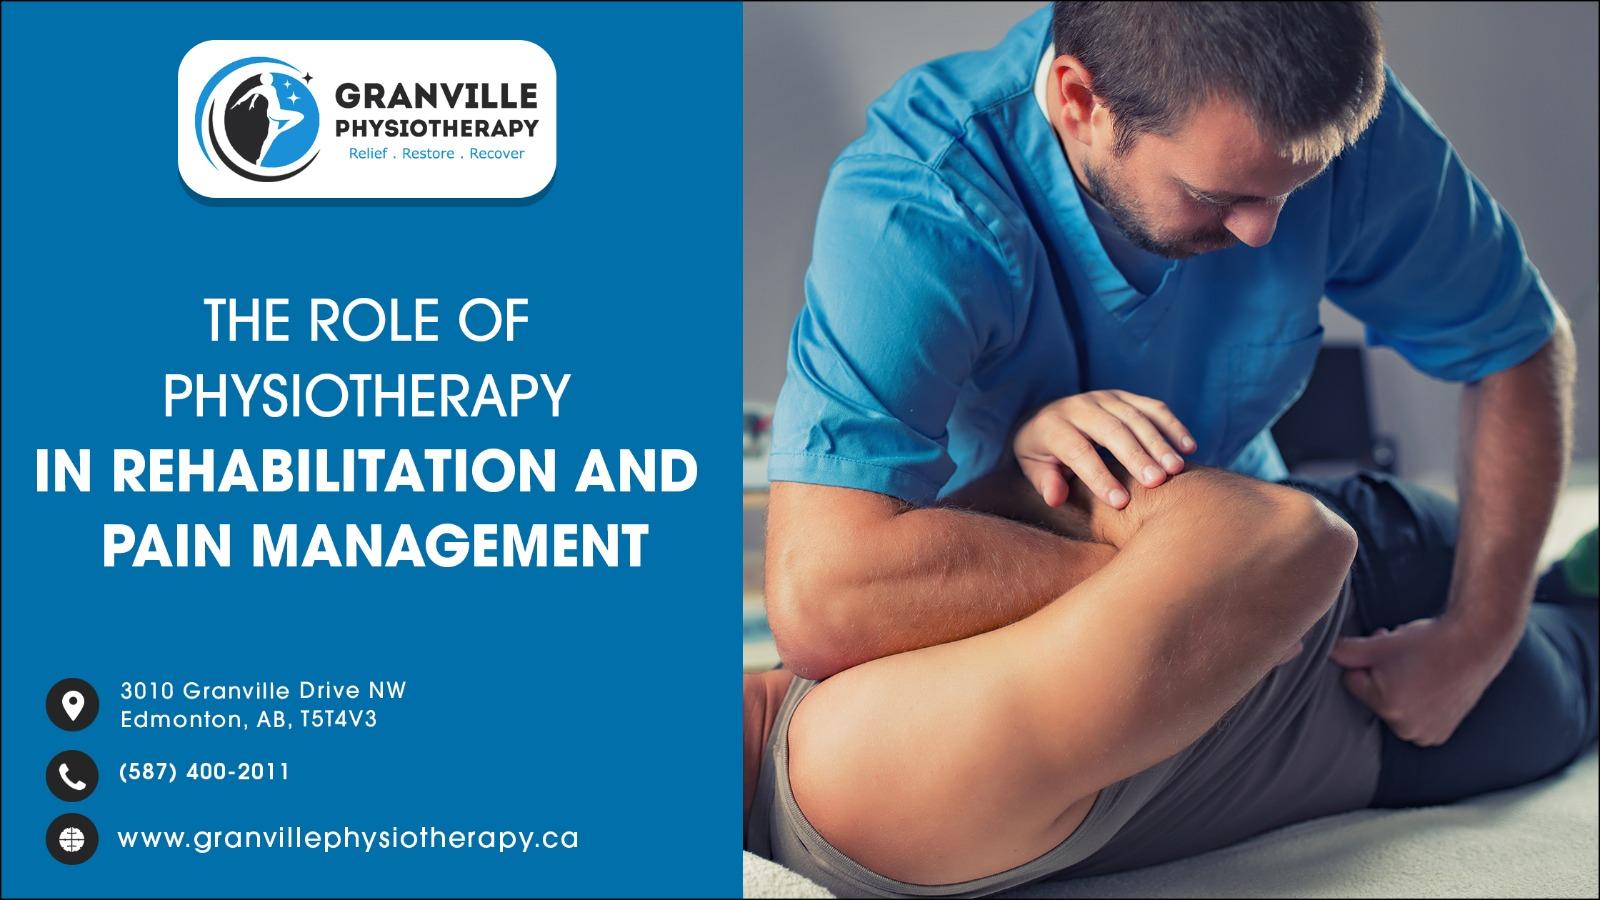 The Role of Physiotherapy in Rehabilitation and Pain Management